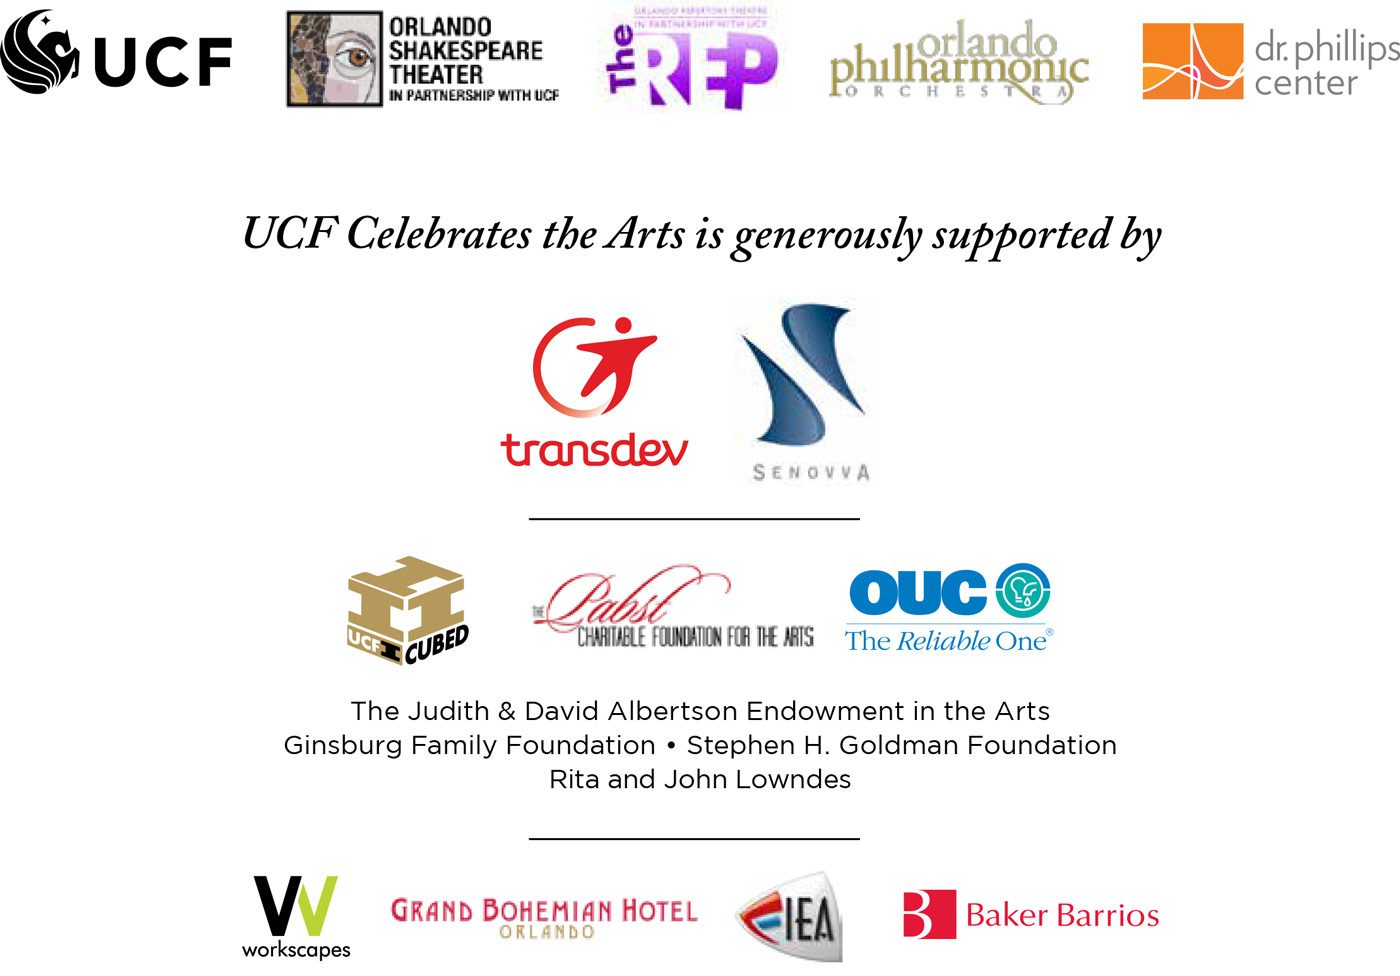 Partner and sponsor logos and text including UCF, Orlando Shakespeare Theater, Orlando Repertory Theatre, Orlando Philharmonic Orchestra, Dr. Phillips Center. UCF Celebrates the Arts is generously supported by Transdev, Senovva, UCF ICubed, Pabst Charitable Foundation for the Arts, OUC The Reliable One, The Judith and David Albertson Endowment in the Arts, Ginsburg Family Foundation, Stephen H. Goldman Foundation, John and Rita Lowndes, Workscapes, Grand Bohemian Hotel Orlando, FIEA, and Baker Barrios